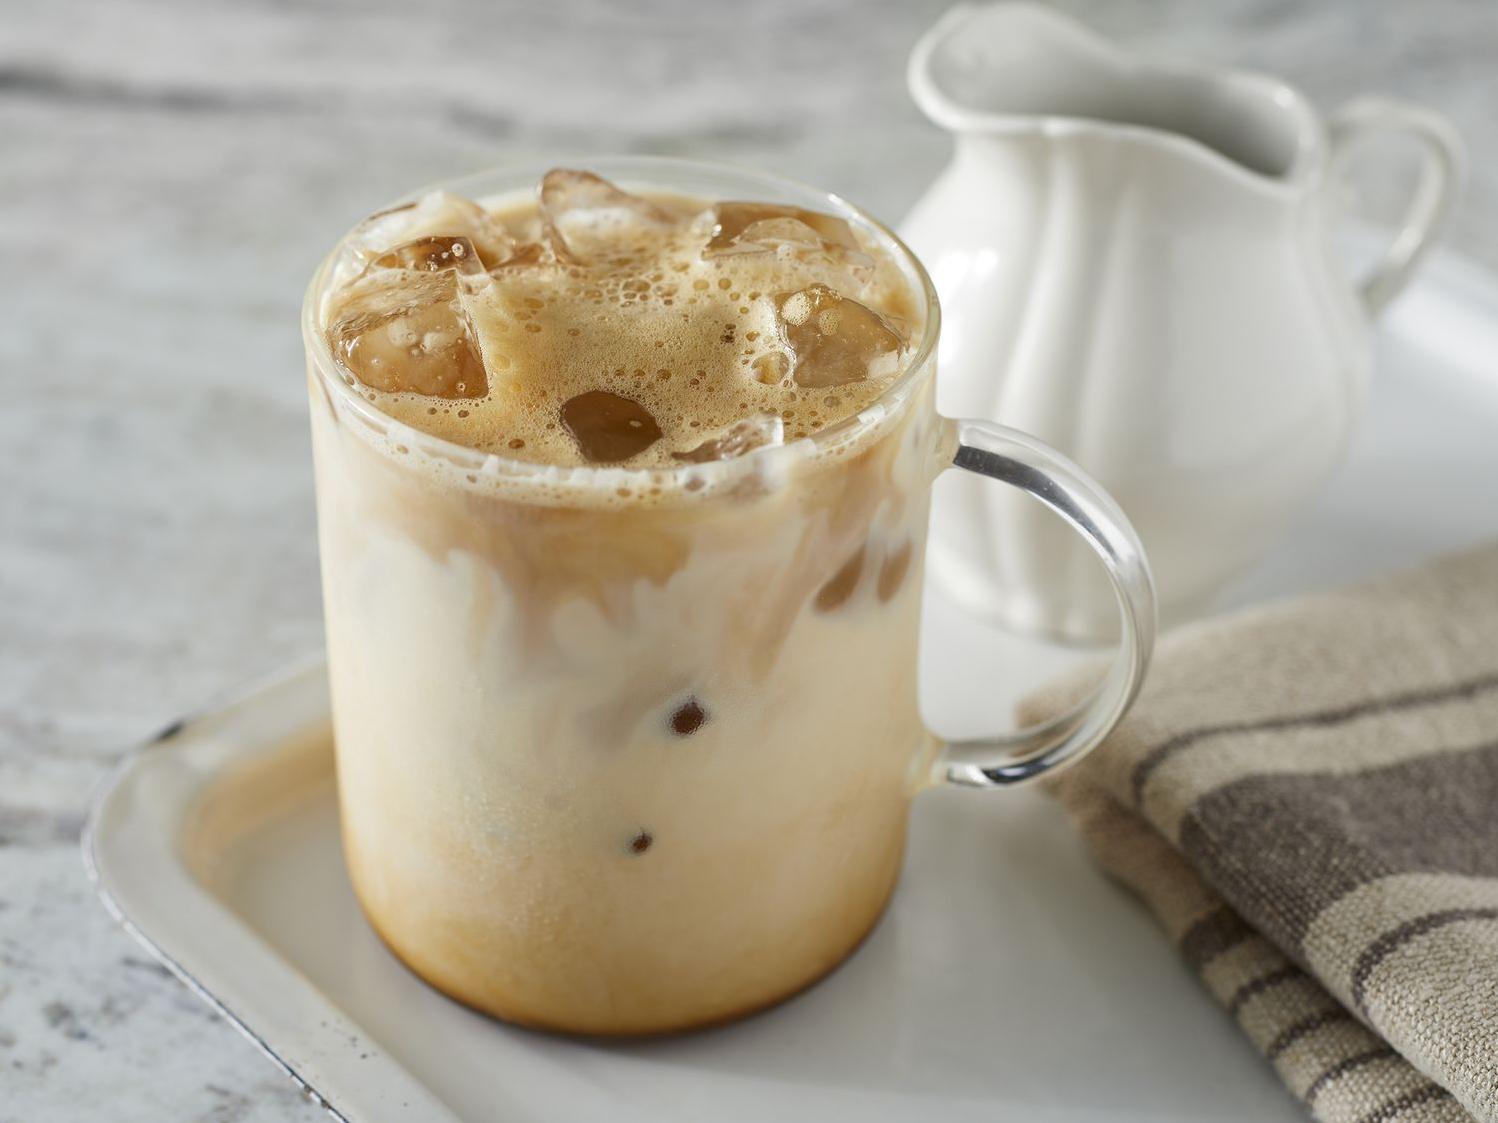 Cool off with a refreshing glass of iced coffee